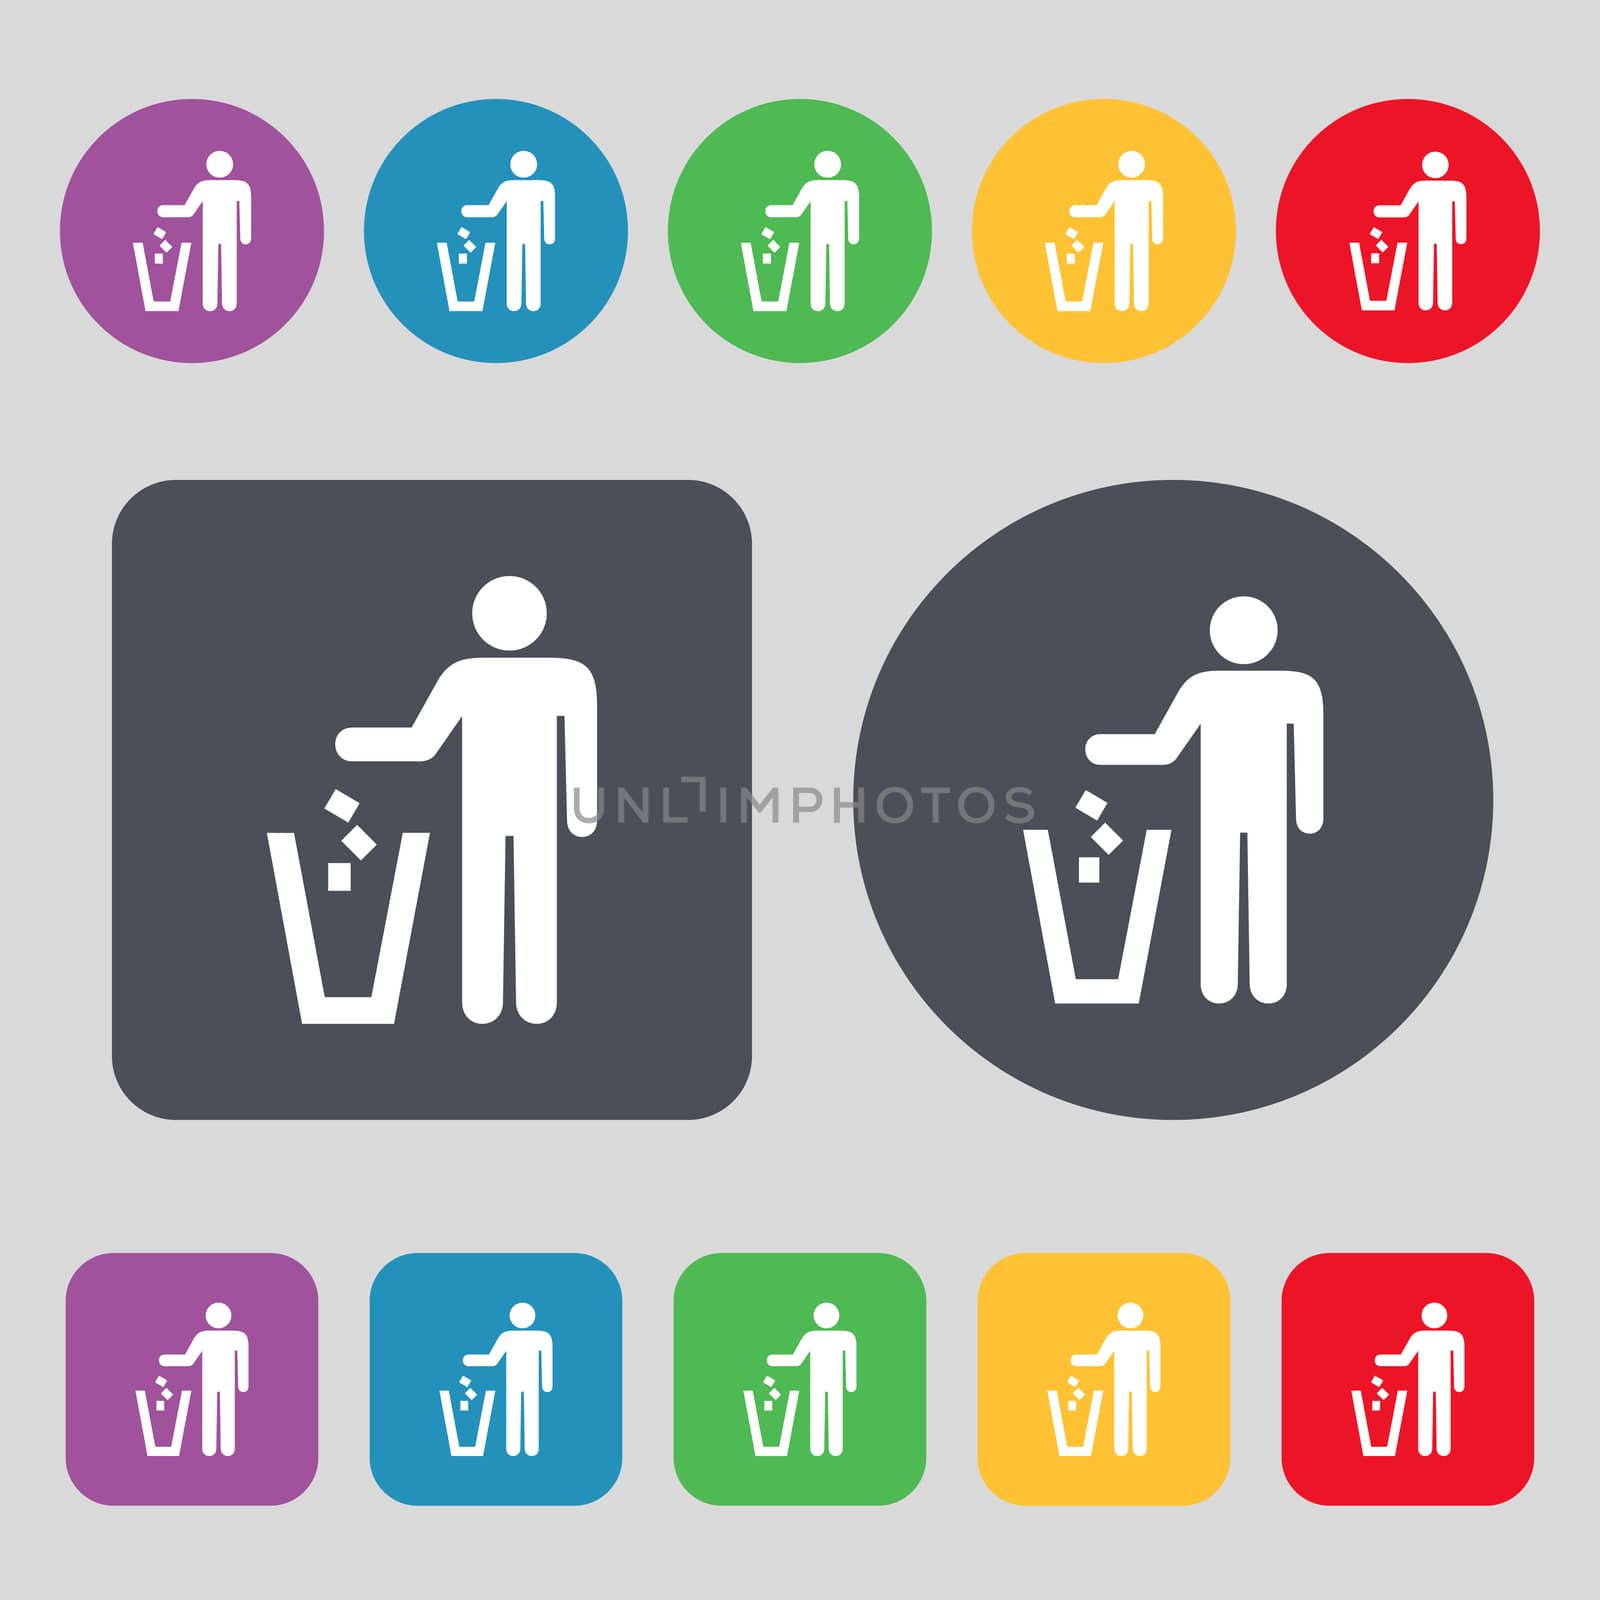 throw away the trash icon sign. A set of 12 colored buttons. Flat design. illustration